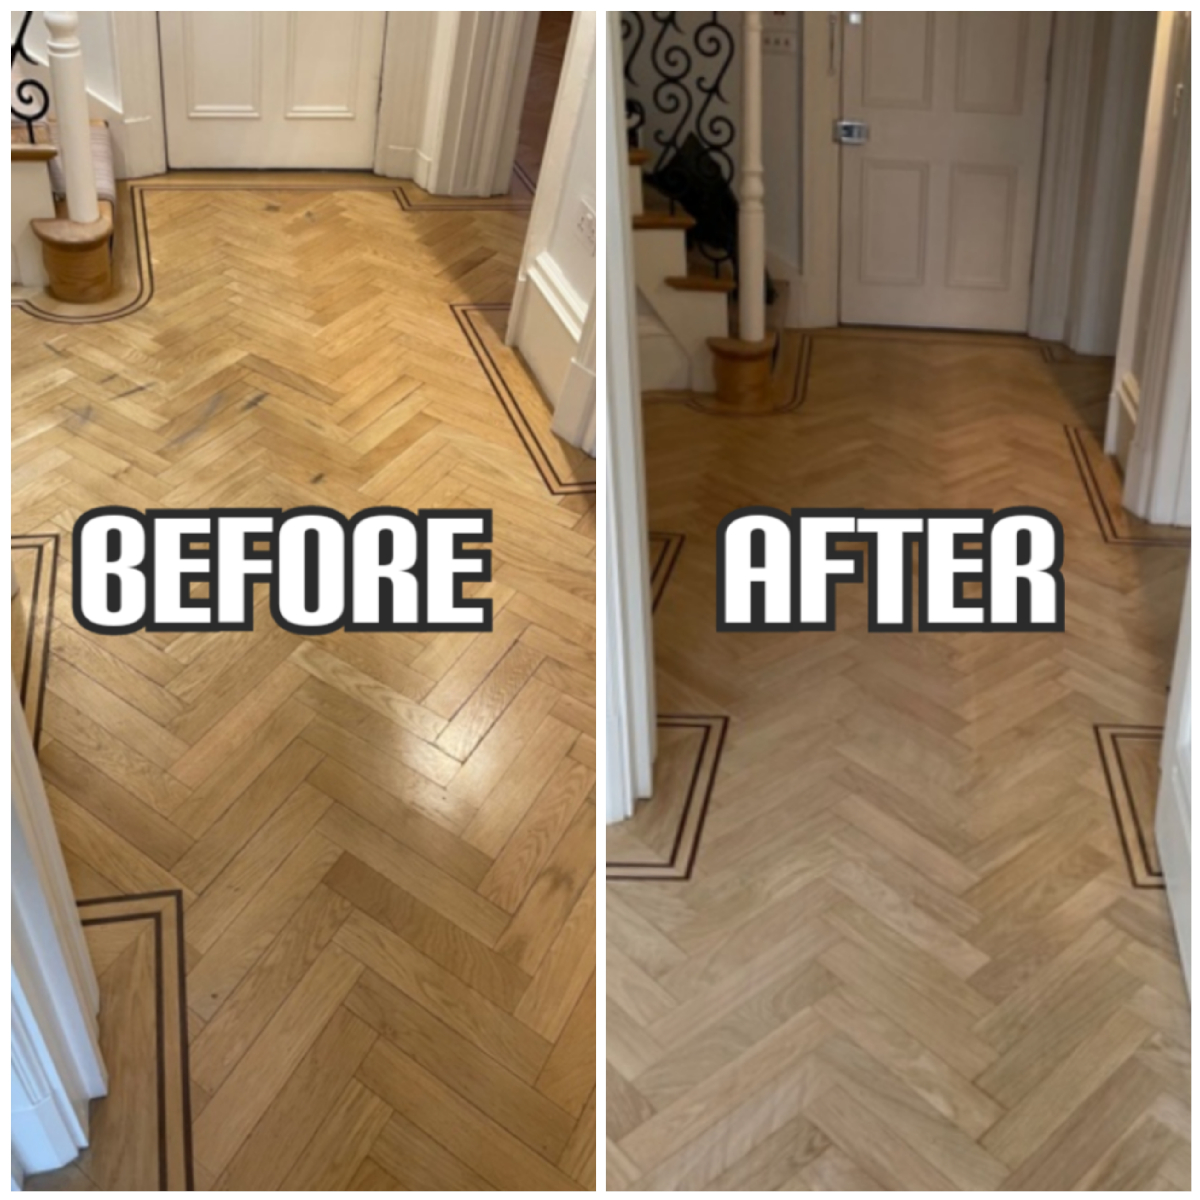 Before and after herringbone floor repair and sanding in a hallway of house, Holloway